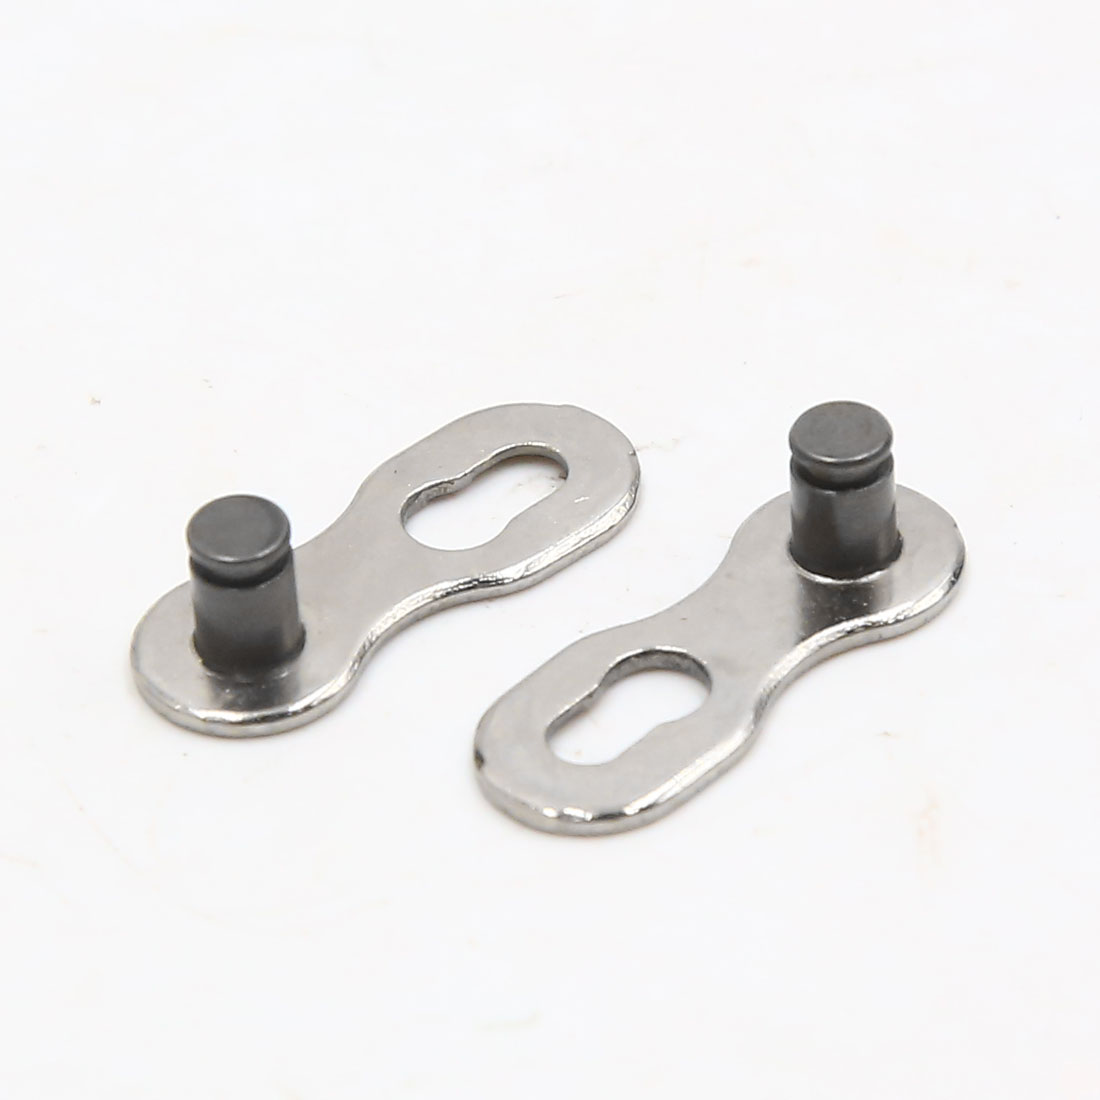 Unique Bargains 4 Pair 10 Speed Chain Quick Master Link Buckle Connector for Bicycle Cycling - image 2 of 2